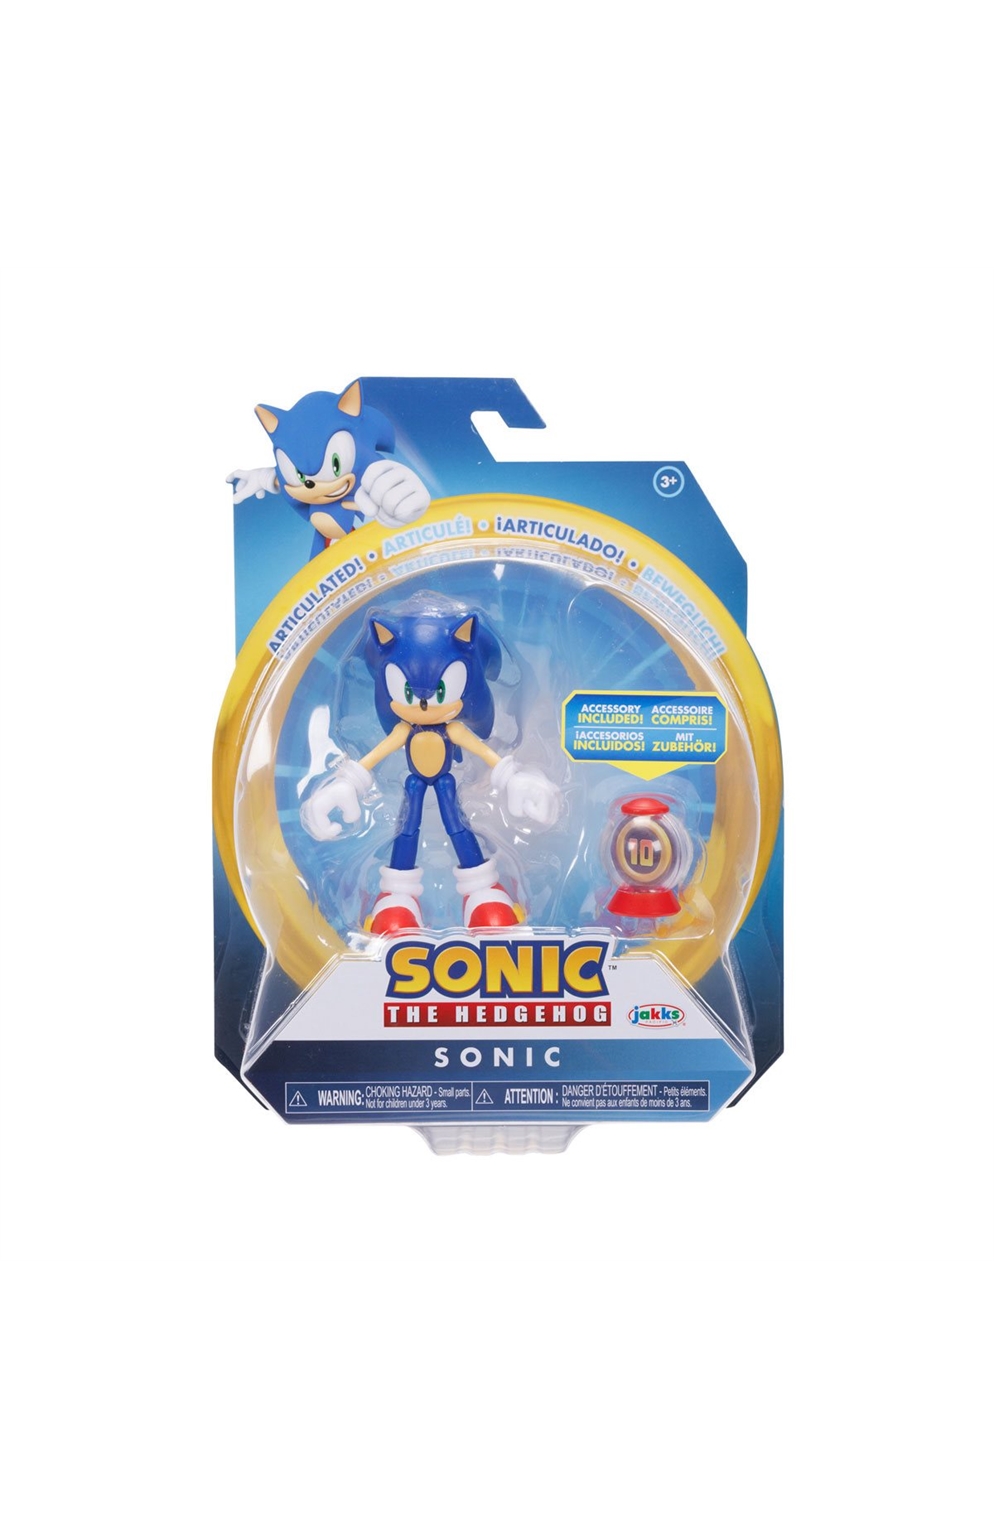 Sonic 4-Inch Figures With Accessory Wave 14 – Sonic